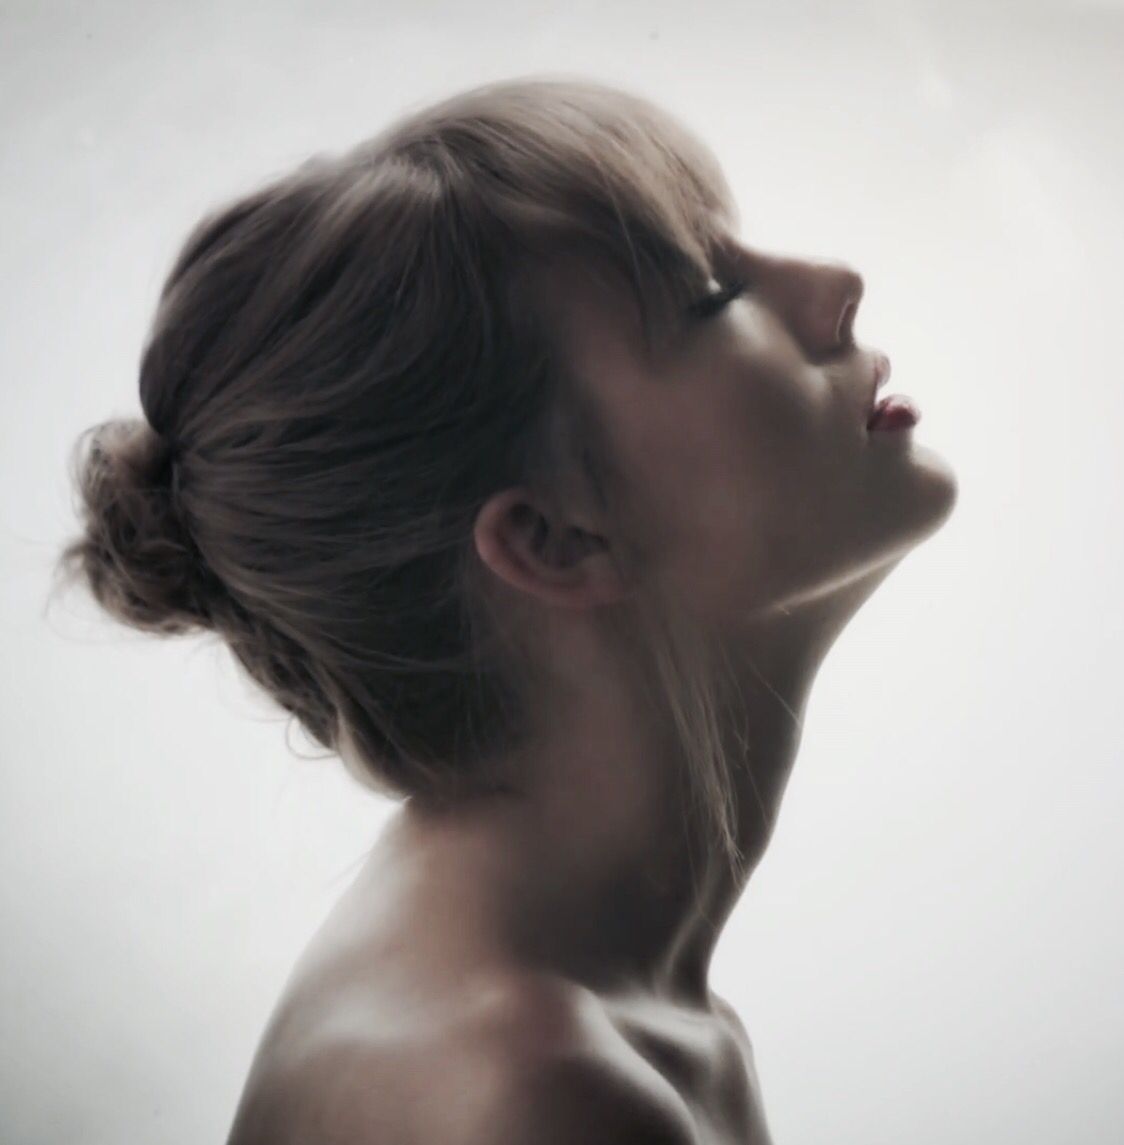 Taylor Swift Style Music Video. Taylor Swift Music Videos, Taylor Swift Music, Taylor Swift Hair